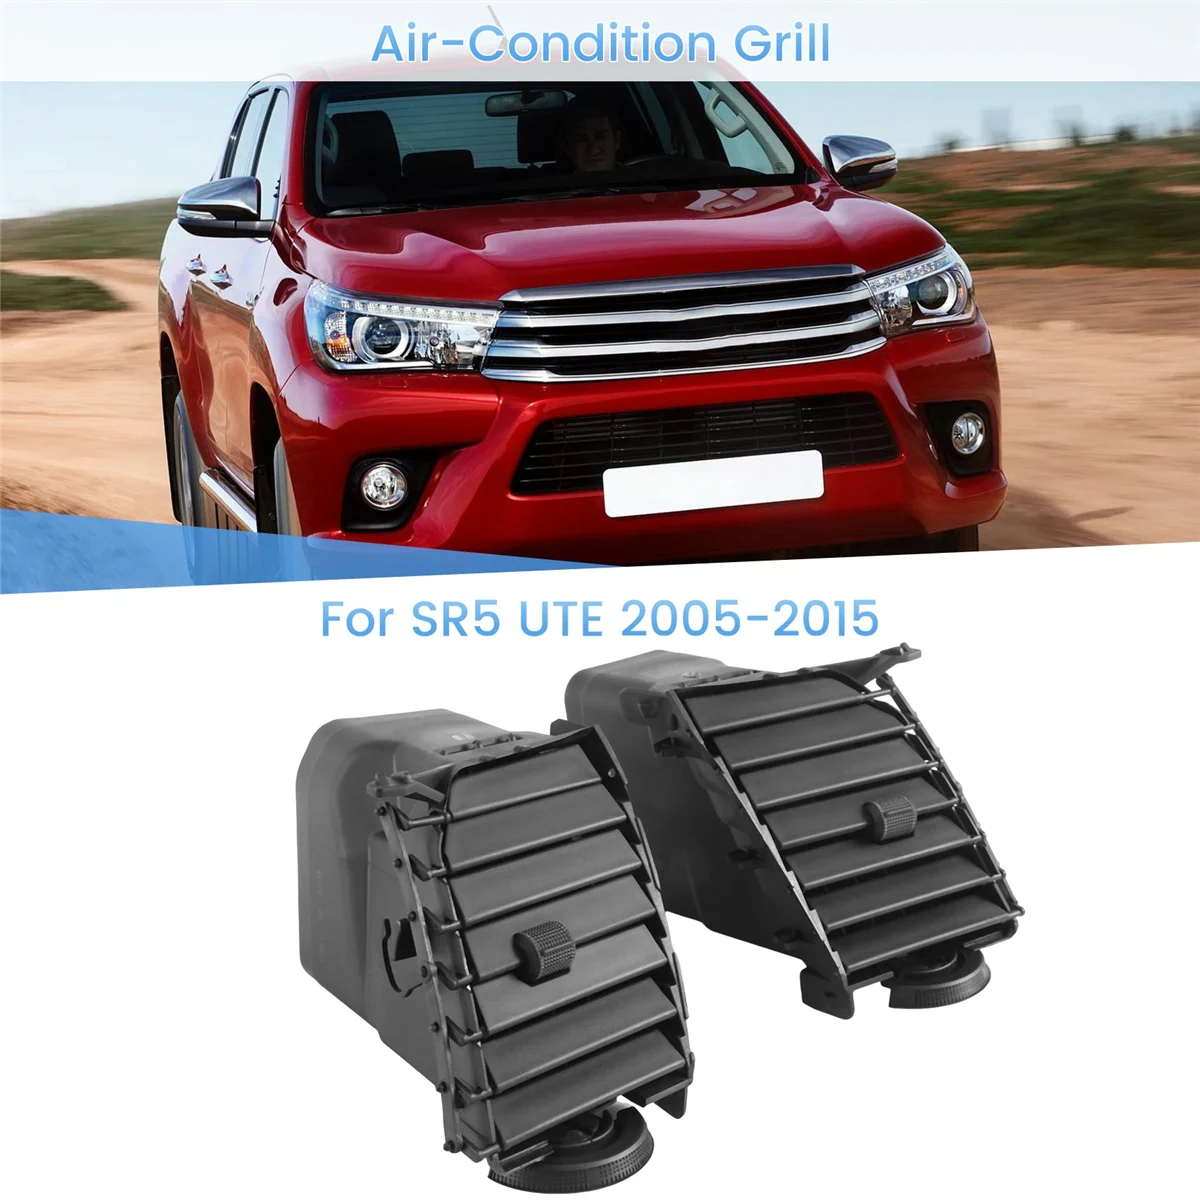 

2x Interior Air-Condition Grill A/C Vent Grille for SR5 UTE 2005-2015 Fortuner Accessories